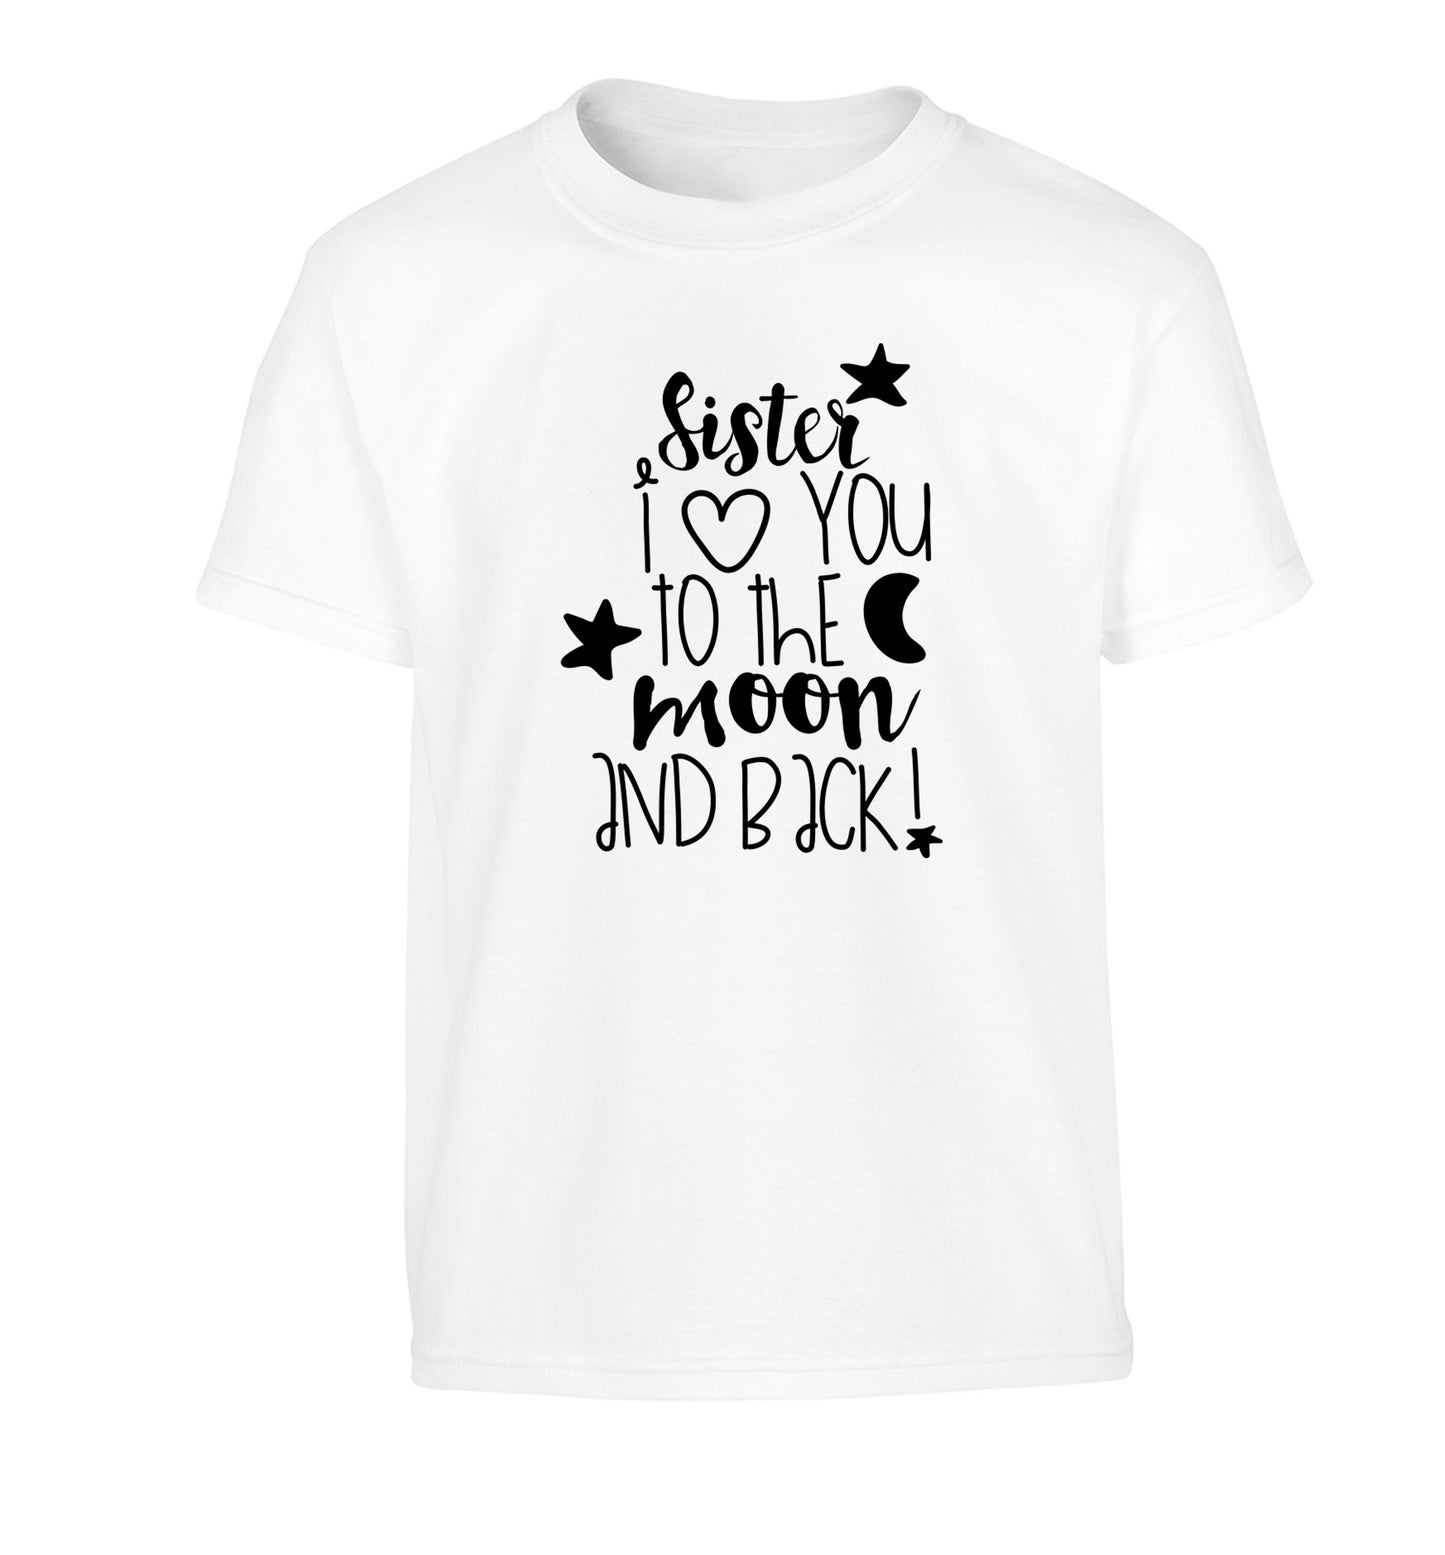 Sister I love you to the moon and back Children's white Tshirt 12-14 Years